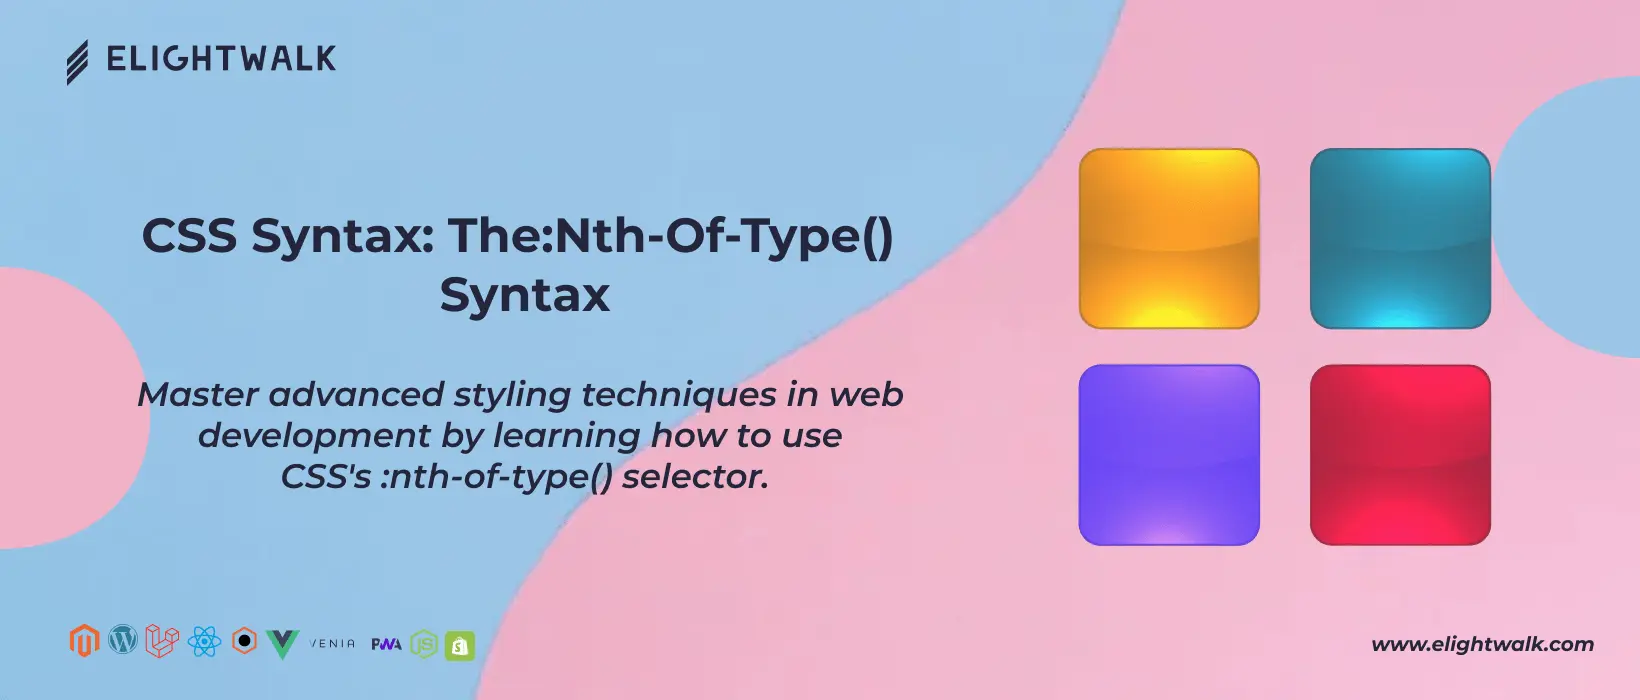 Understand the CSS Syntax 